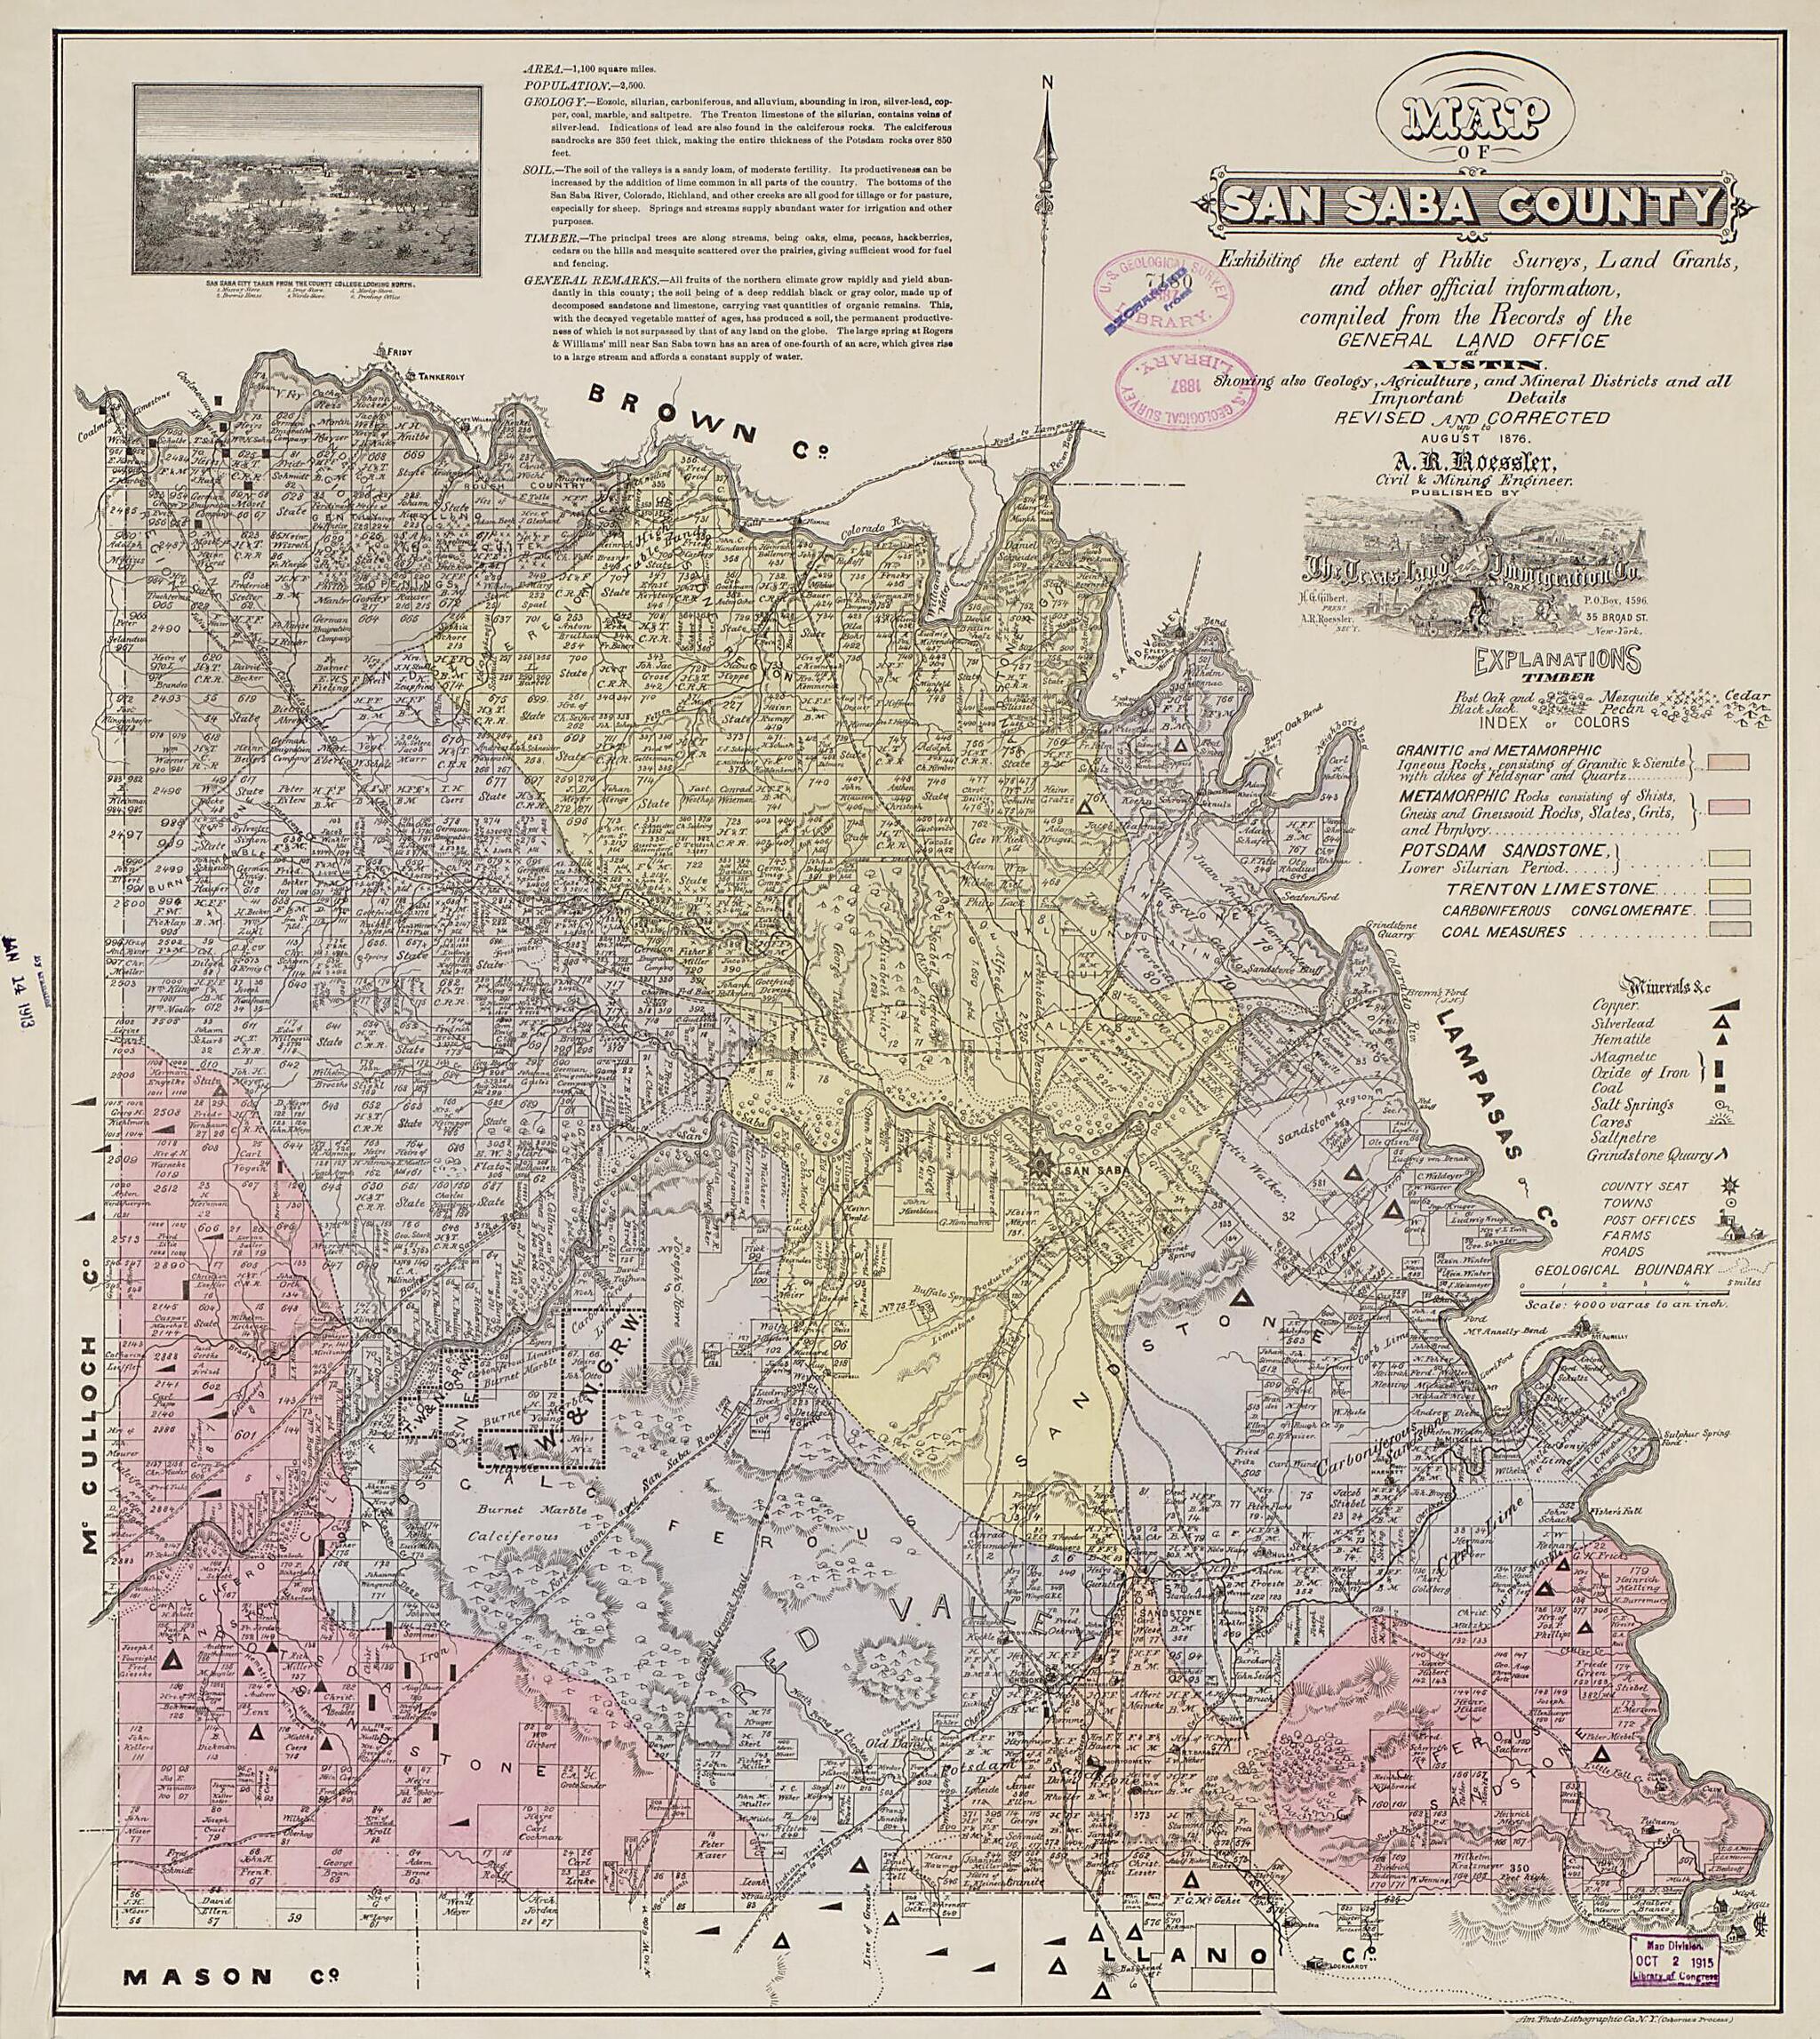 This old map of Map of San Saba County : Exhibiting the Extent of Public Surveys, Land Grants, and Other Official Information ; Compiled from the Records of the General Land Office at Austin, Showing Also Geology, Agriculture, and Mineral Districts and A